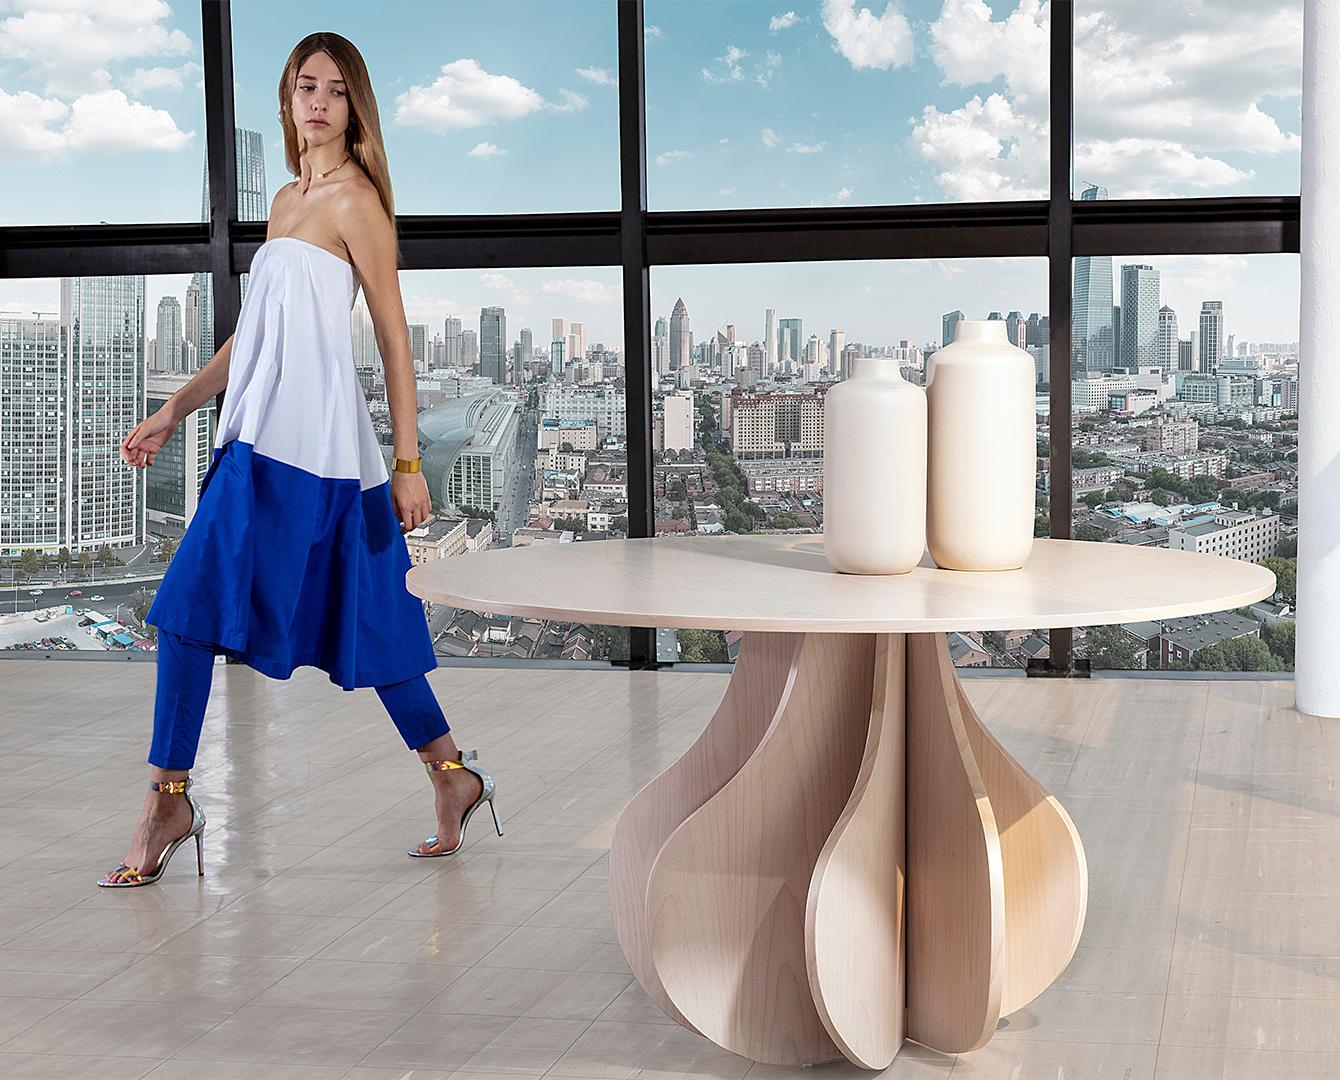 Yuli dining table, inspired in the heart and conceived in the mind.
Simplicity and complexity unite in a perfect balance, having as a result a breathtaking and unique design.
Yuli is a combination of solid craftsmanship and materials of the highest